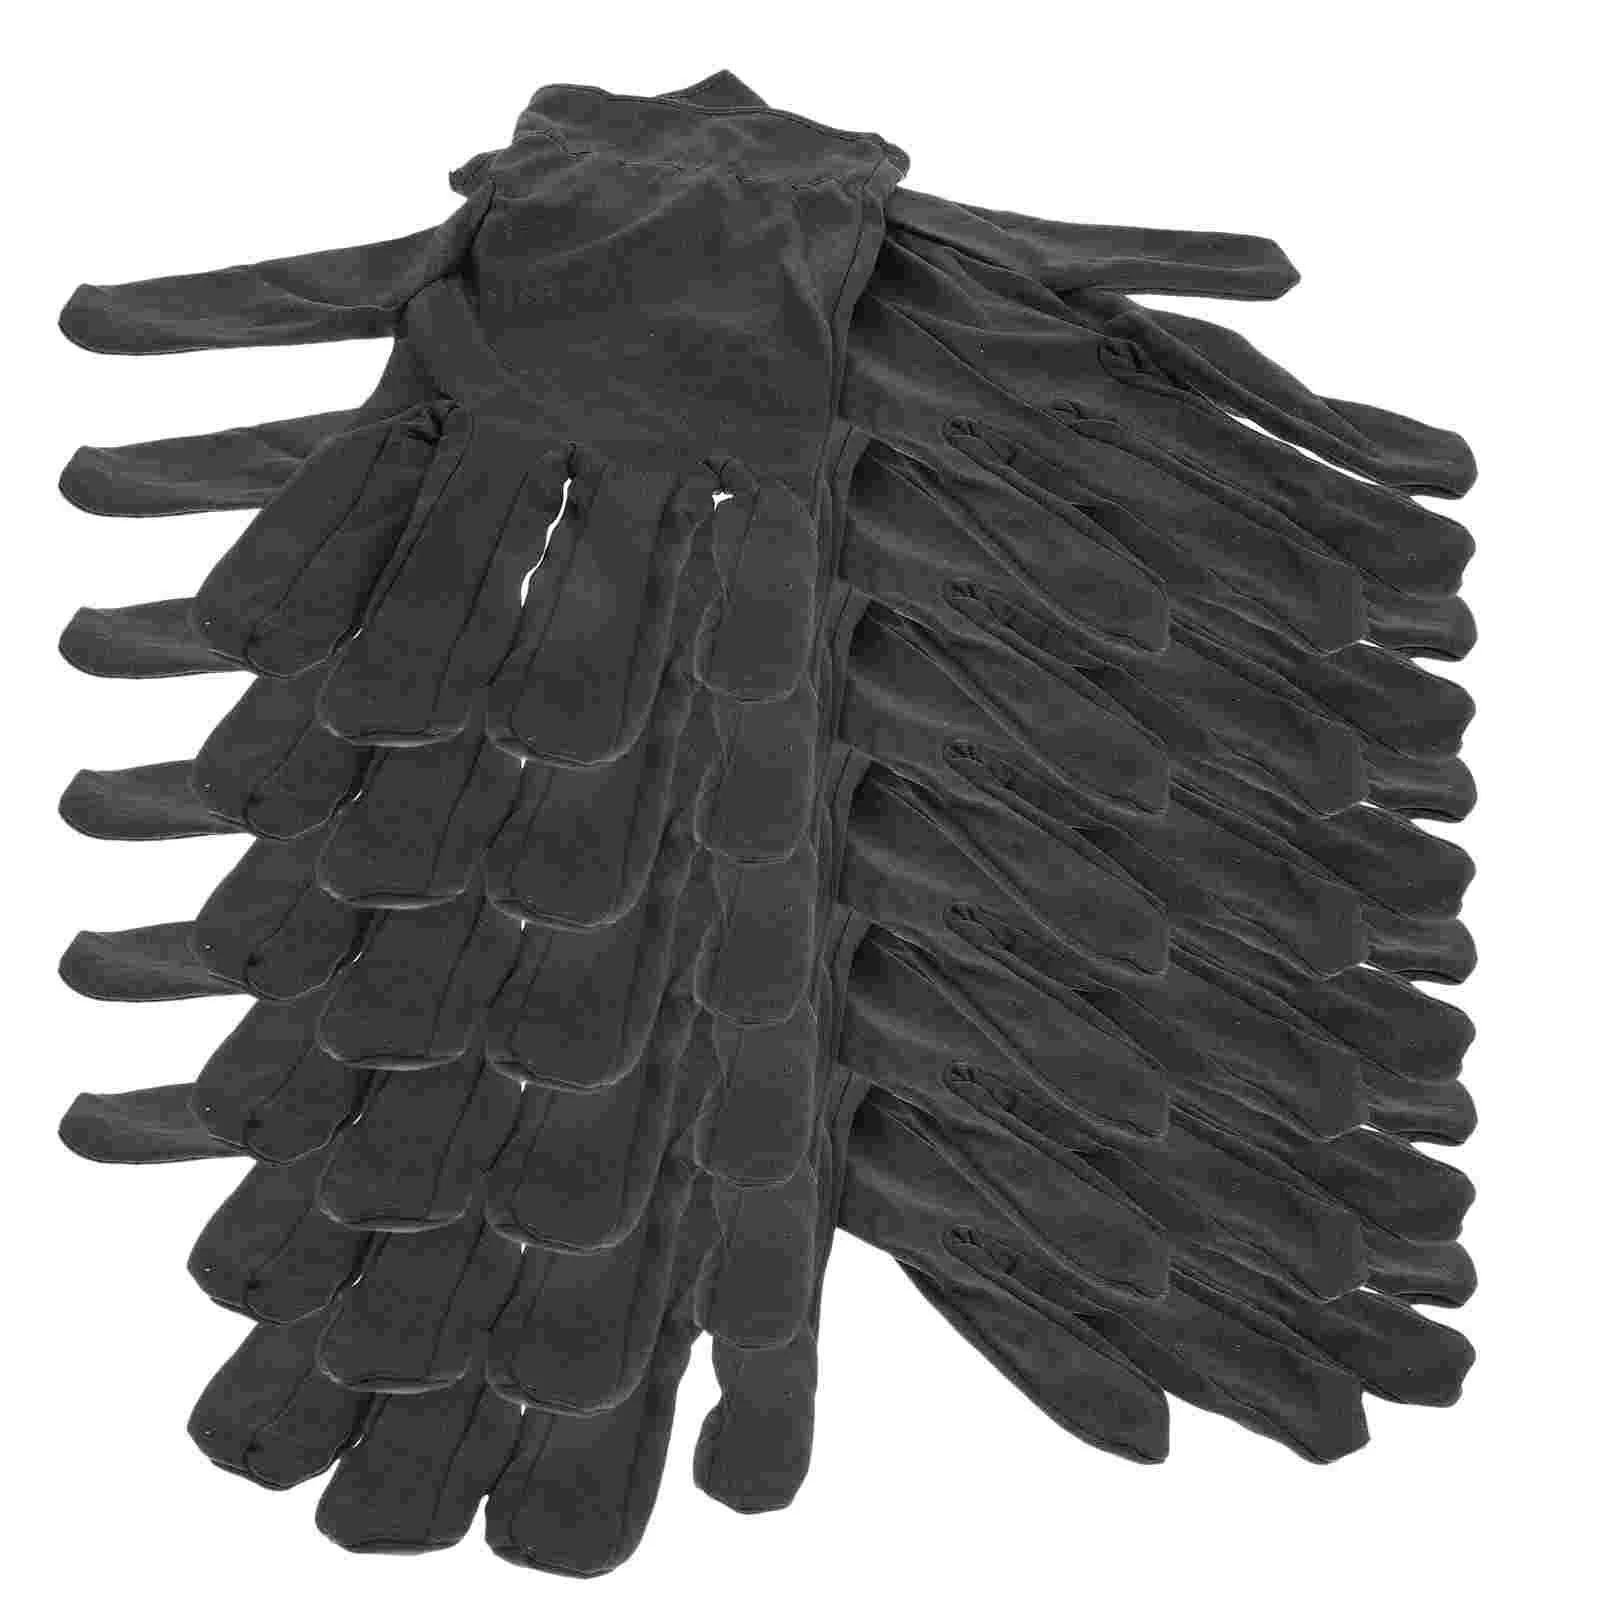 

6 Pairs Elastic Jewelry Gloves Miss Moisturizing Clean Handling Gloves¡¢ Cotton Inspection Black Work for men